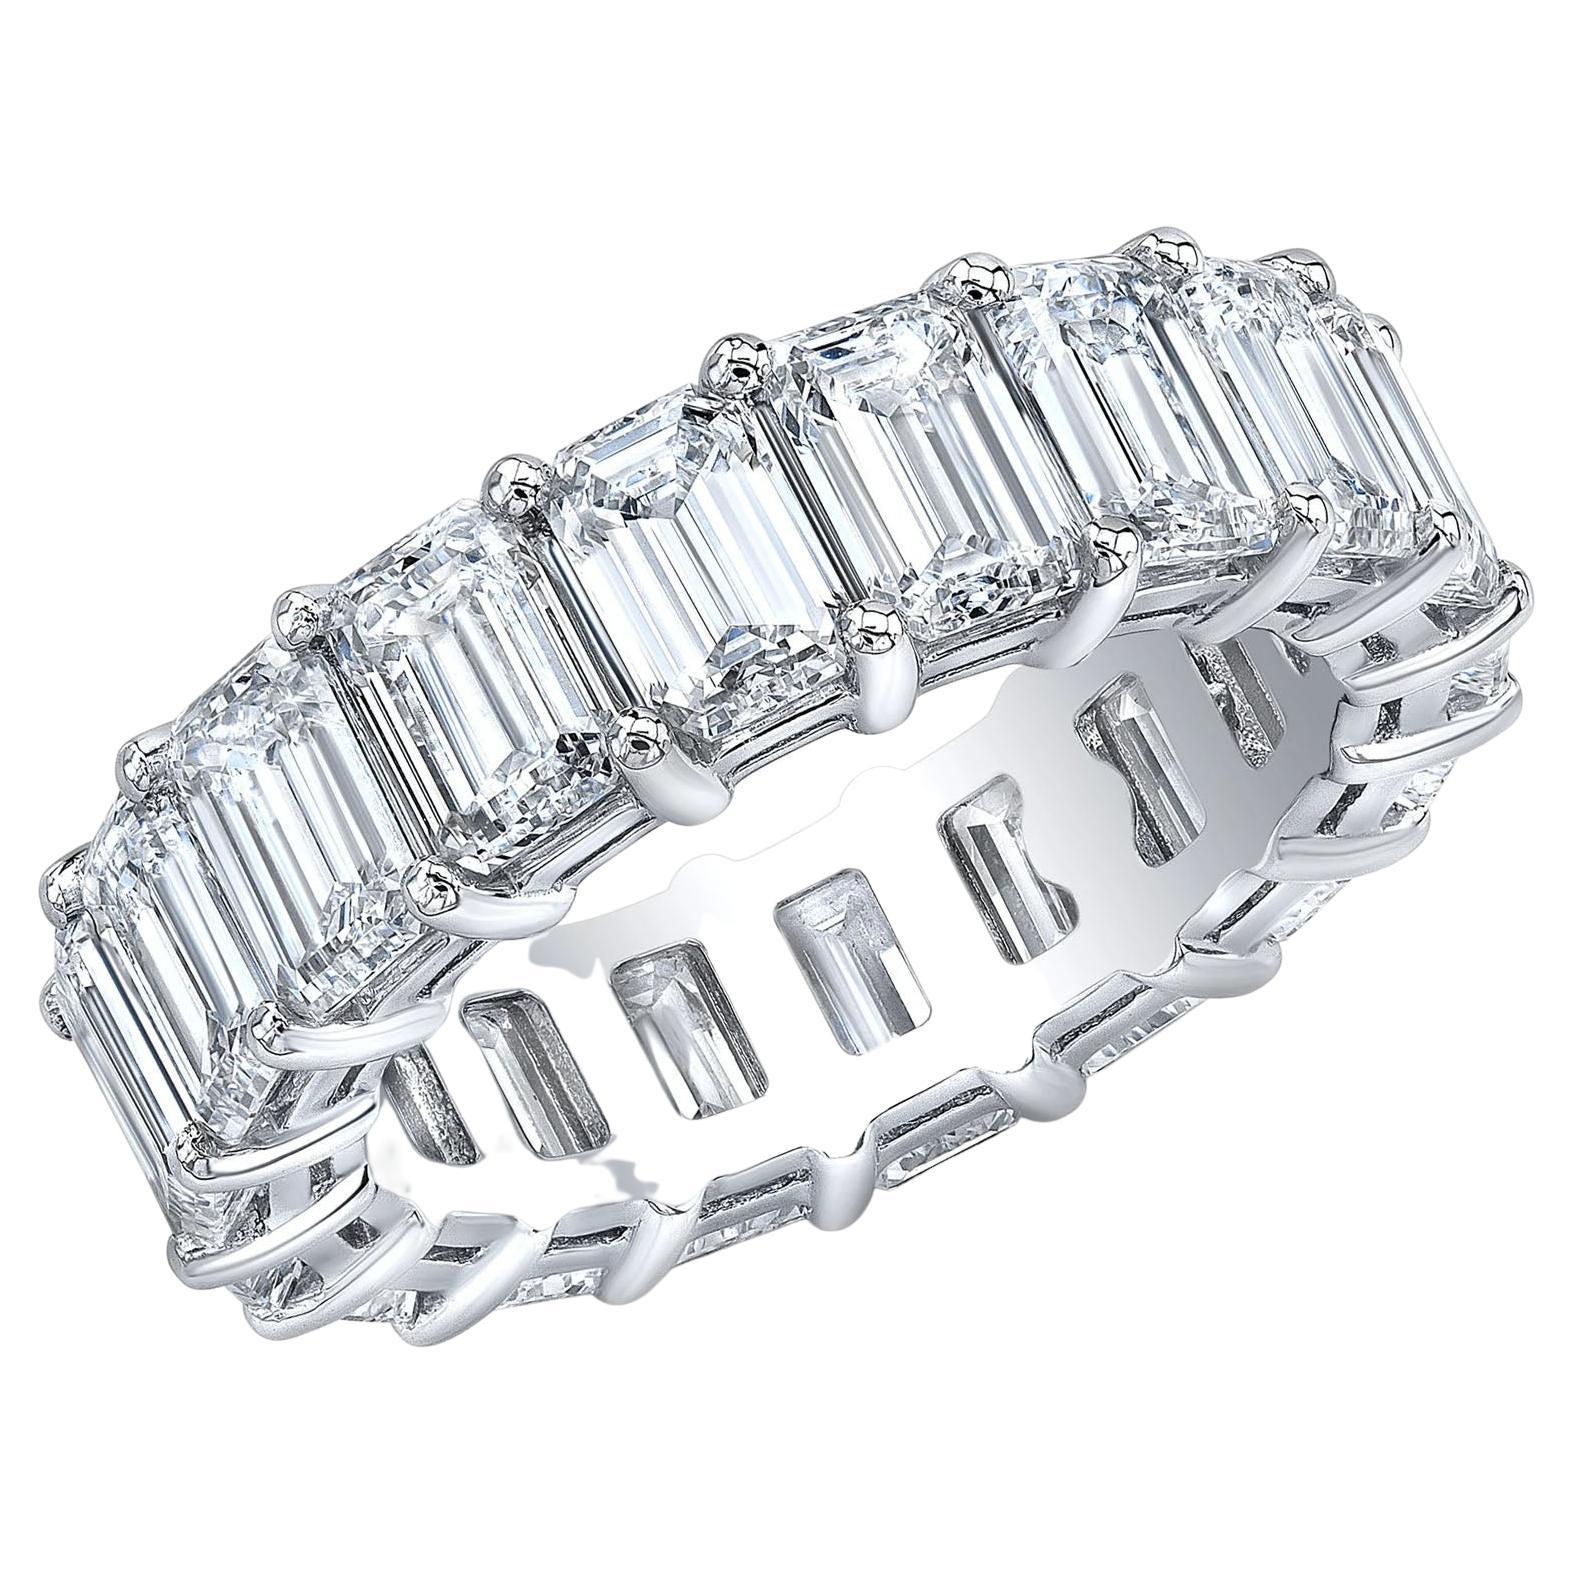 For Sale:  6 Carats Emerald Cut Eternity Band Shared Prongs F-G Color VS1 Clarity 18k Gold